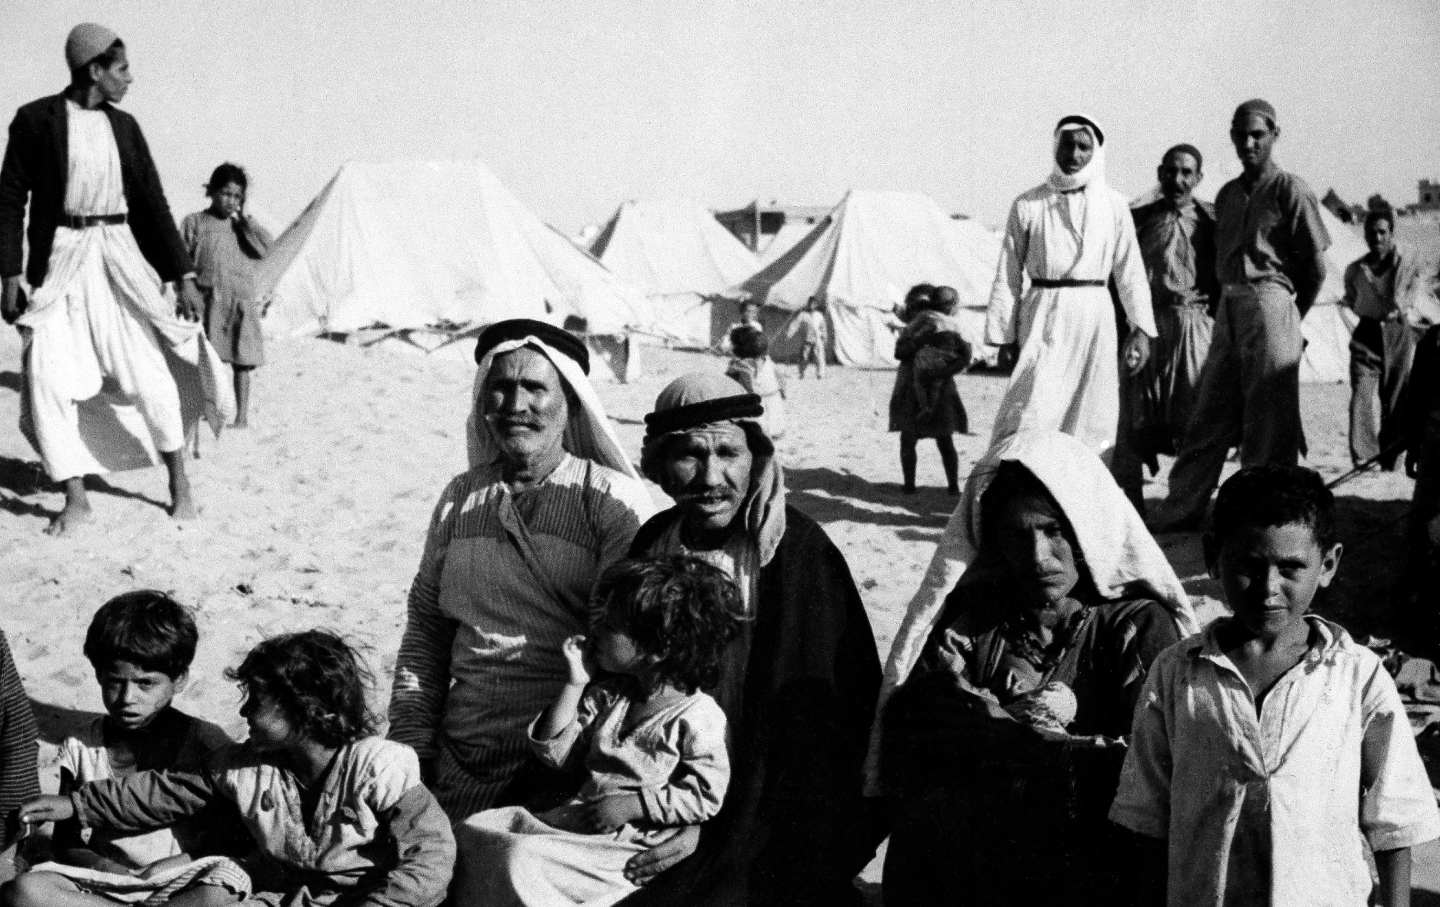 This family owned their own farm near Haifa. They fled when the British mandate ended and it became certain Israel would control the town. Today they are refugees in a camp near Gaza. The only possession they still have is a padded blanket.